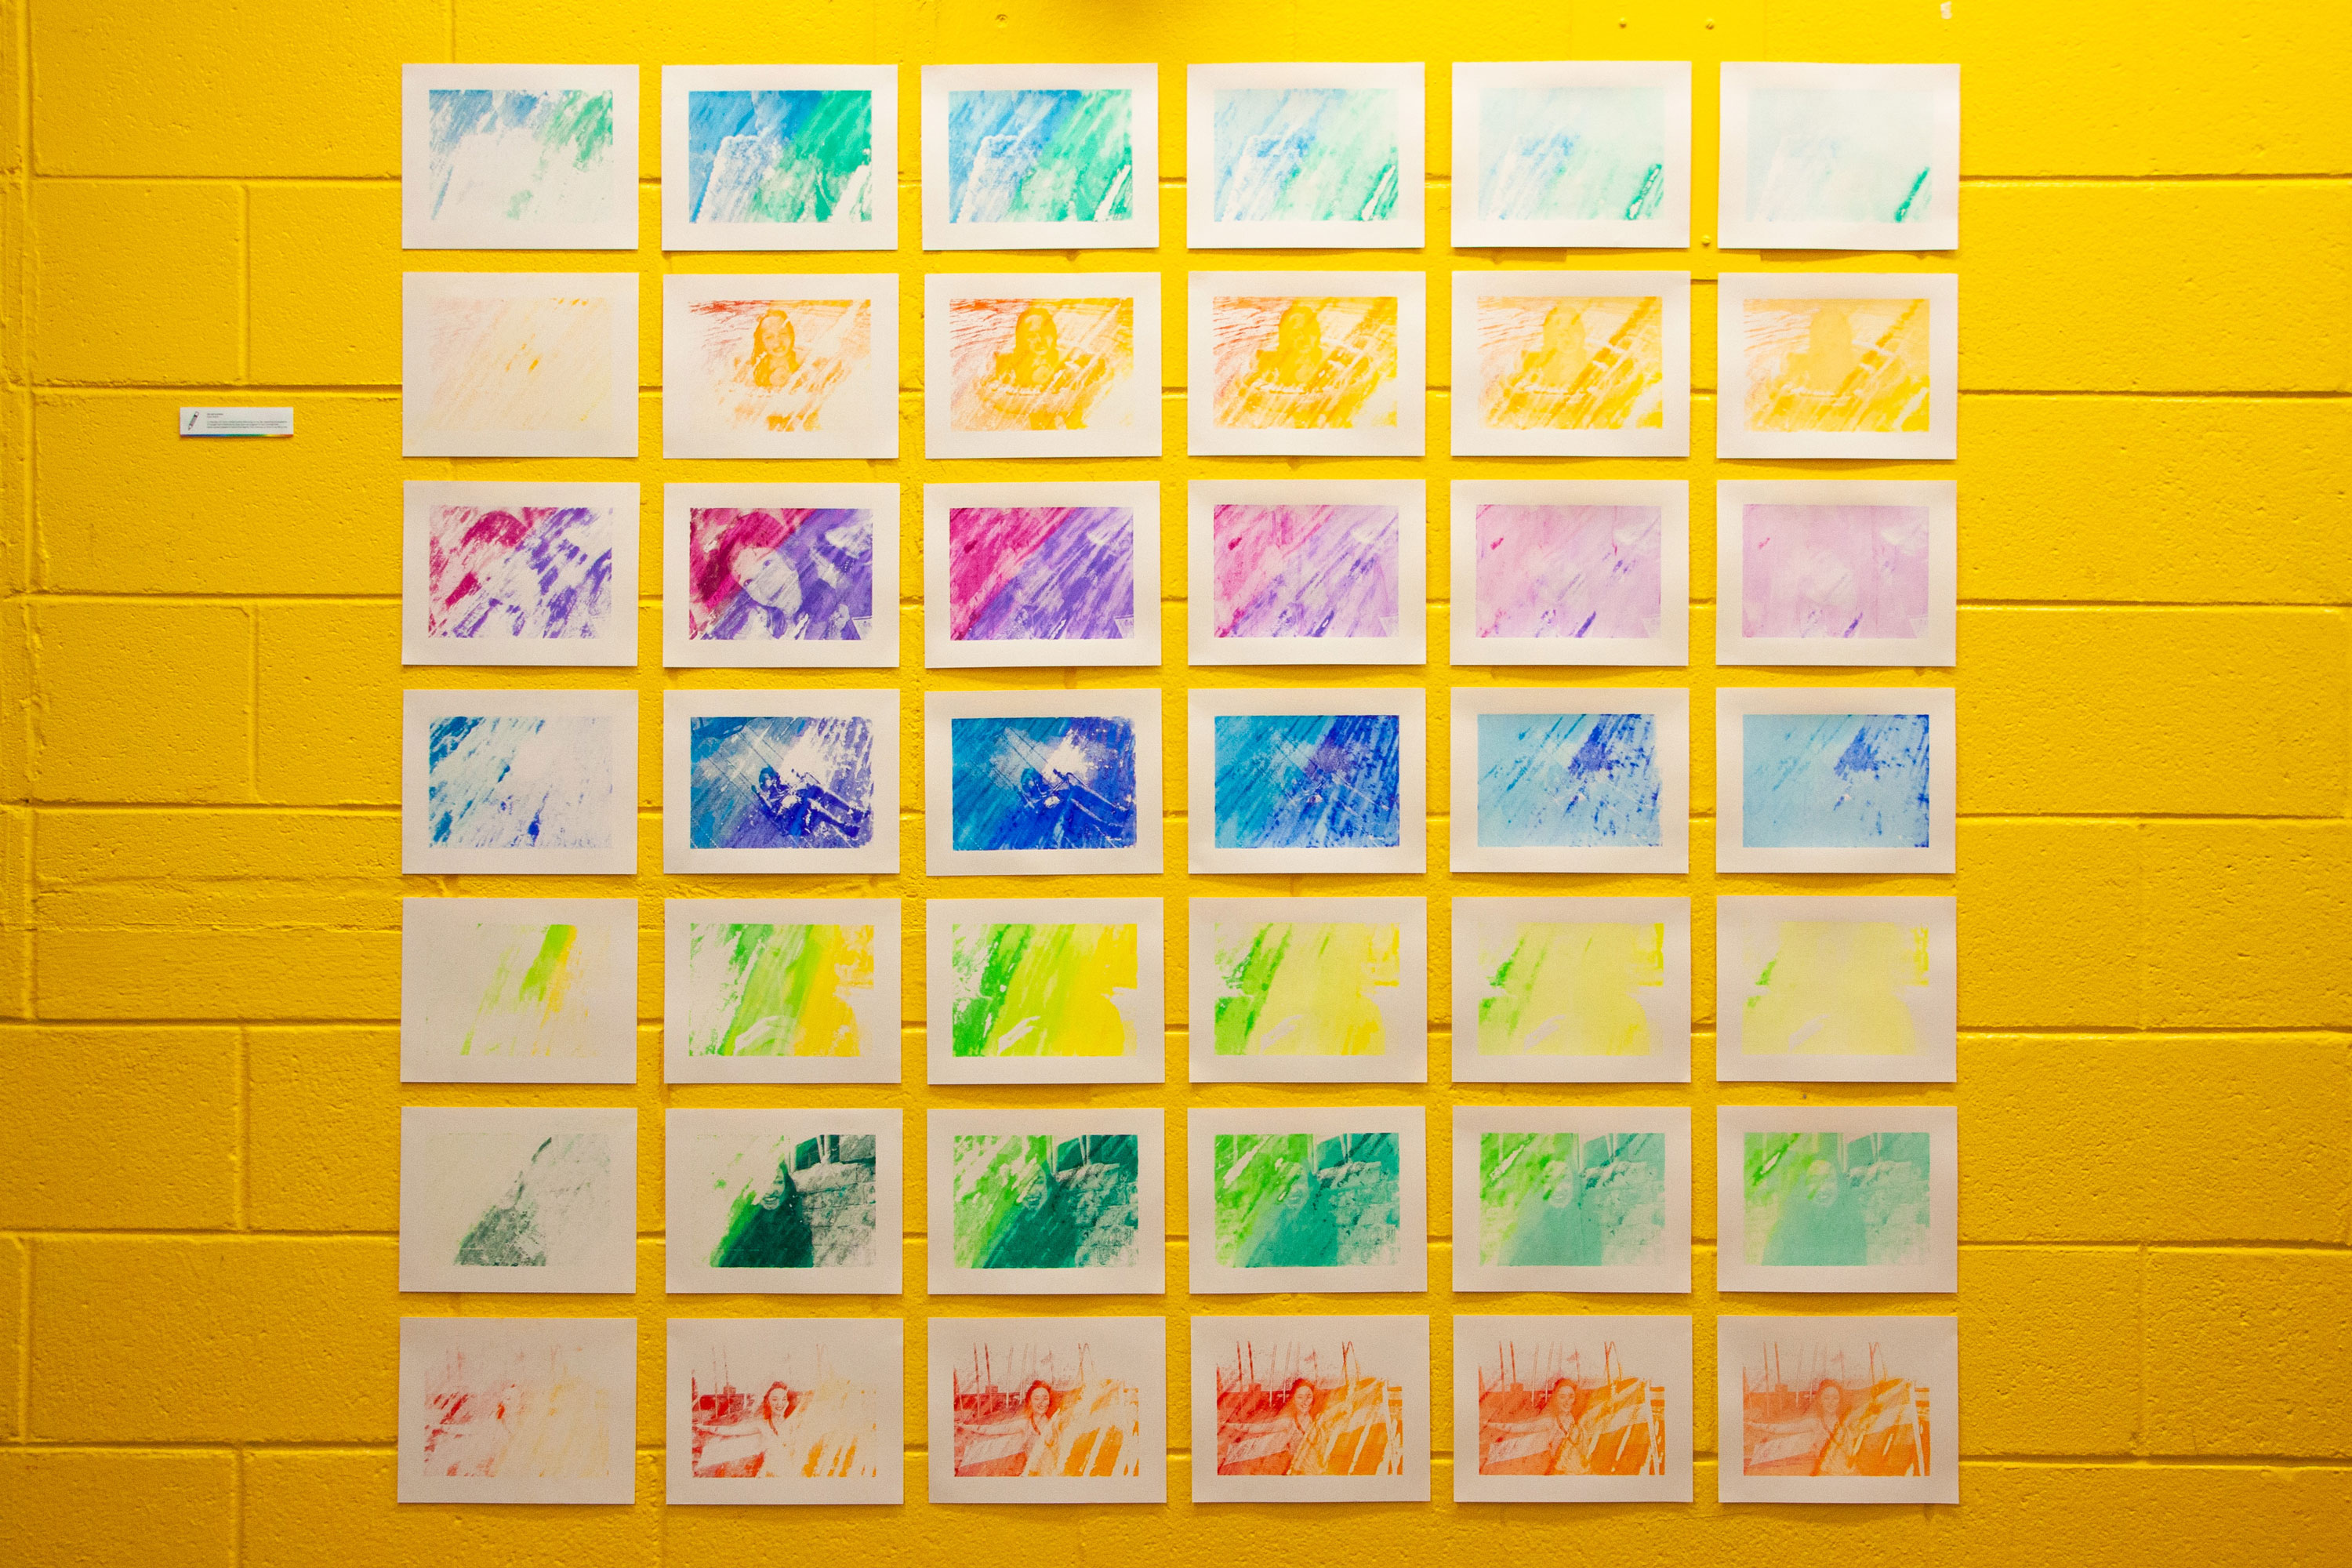 An installation of 42 colorful monoprints, organized into a grid of 6 columns and 7 rows. Down each column are prints of various photographs in multi-colored gradients, arranged in chronological order. Across each row is a series of ghost prints created from the prints on the left. The prints are installed on a yellow wall with a small label next to the grid.